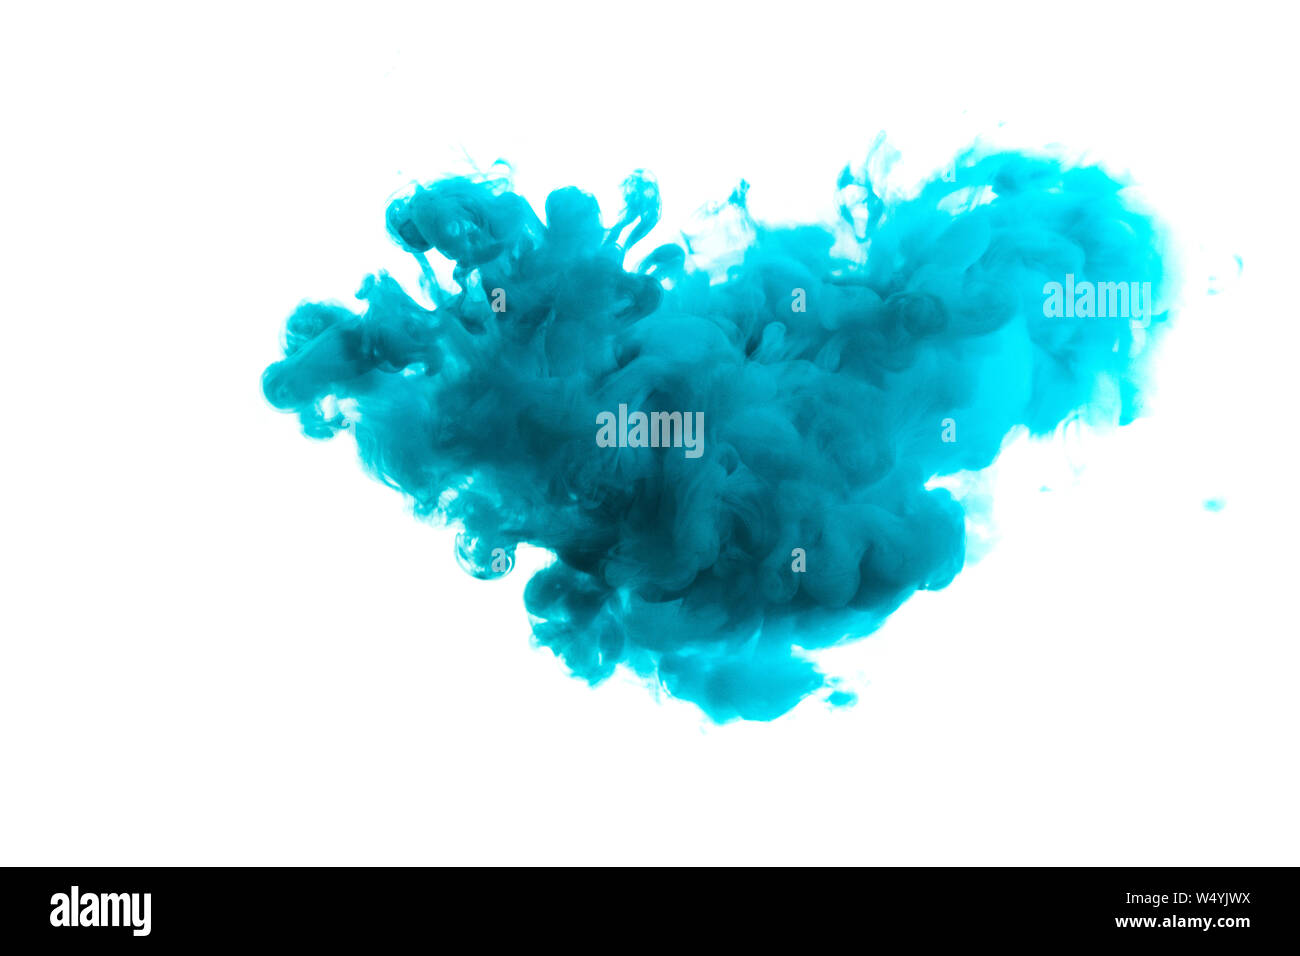 Ink In Water Paint Splash Colorful Abstract Background Stock Photo - Alamy